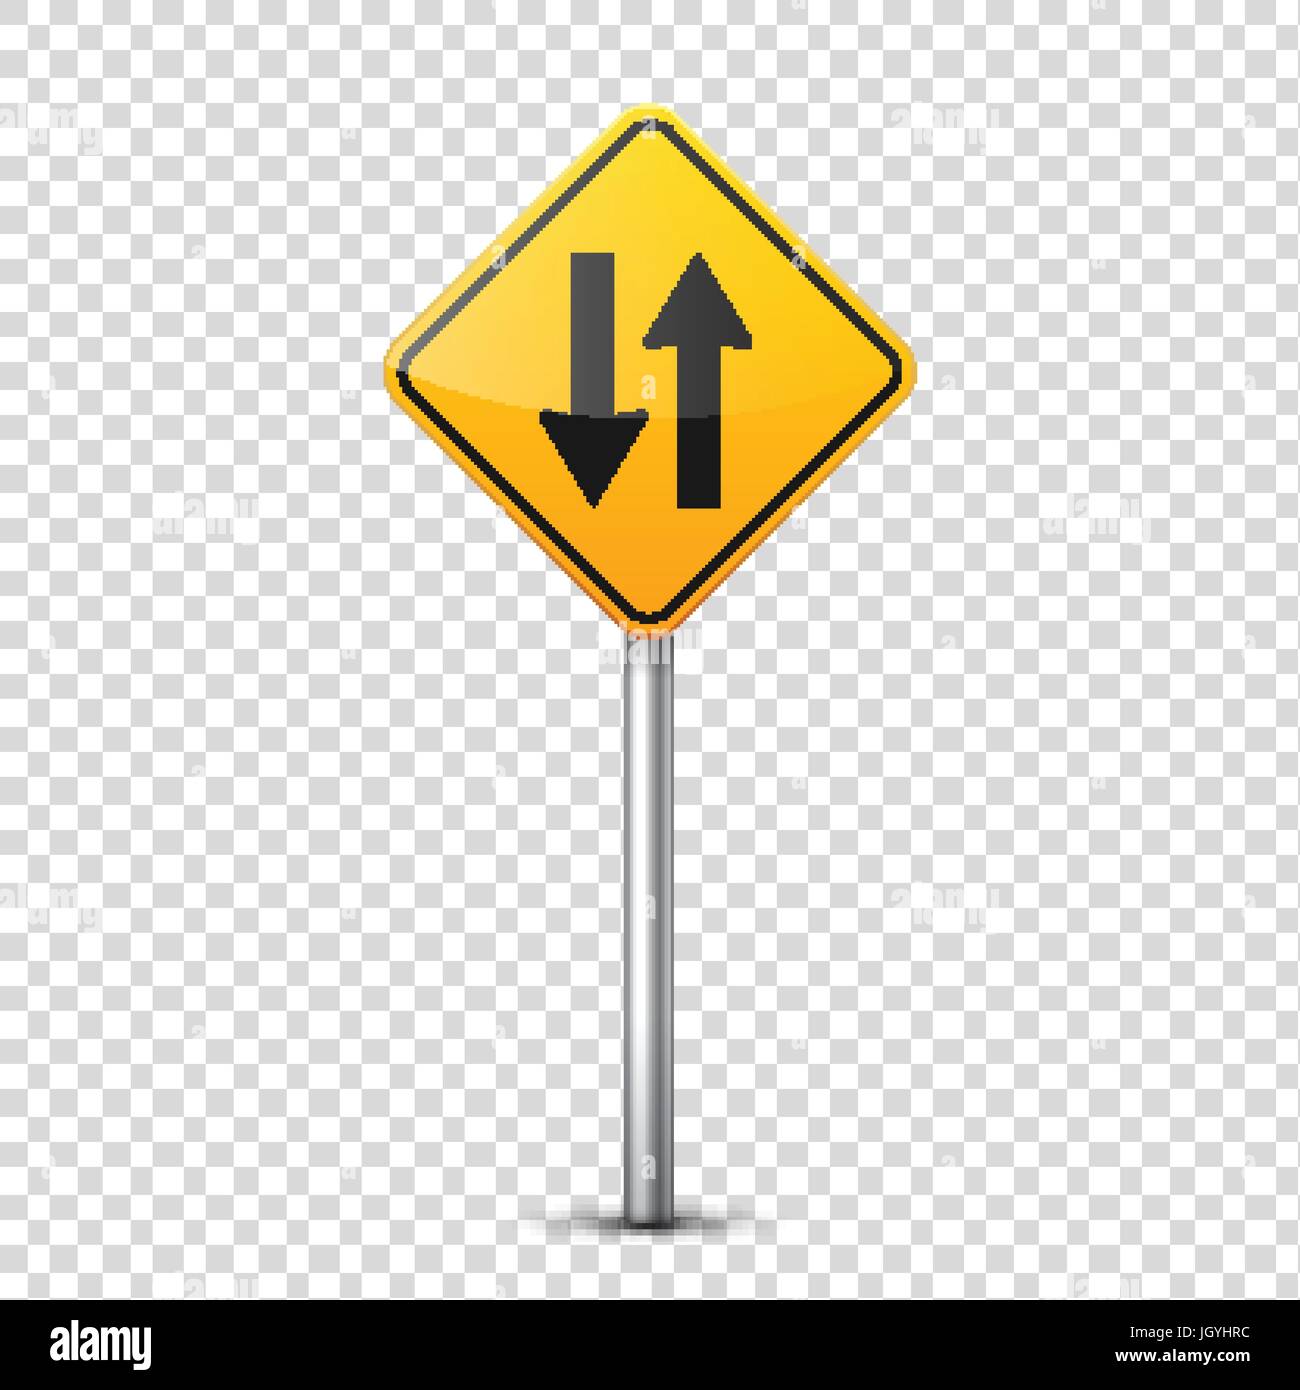 Page 2 Yield Sign Blank Illustration High Resolution Stock Photography And Images Alamy